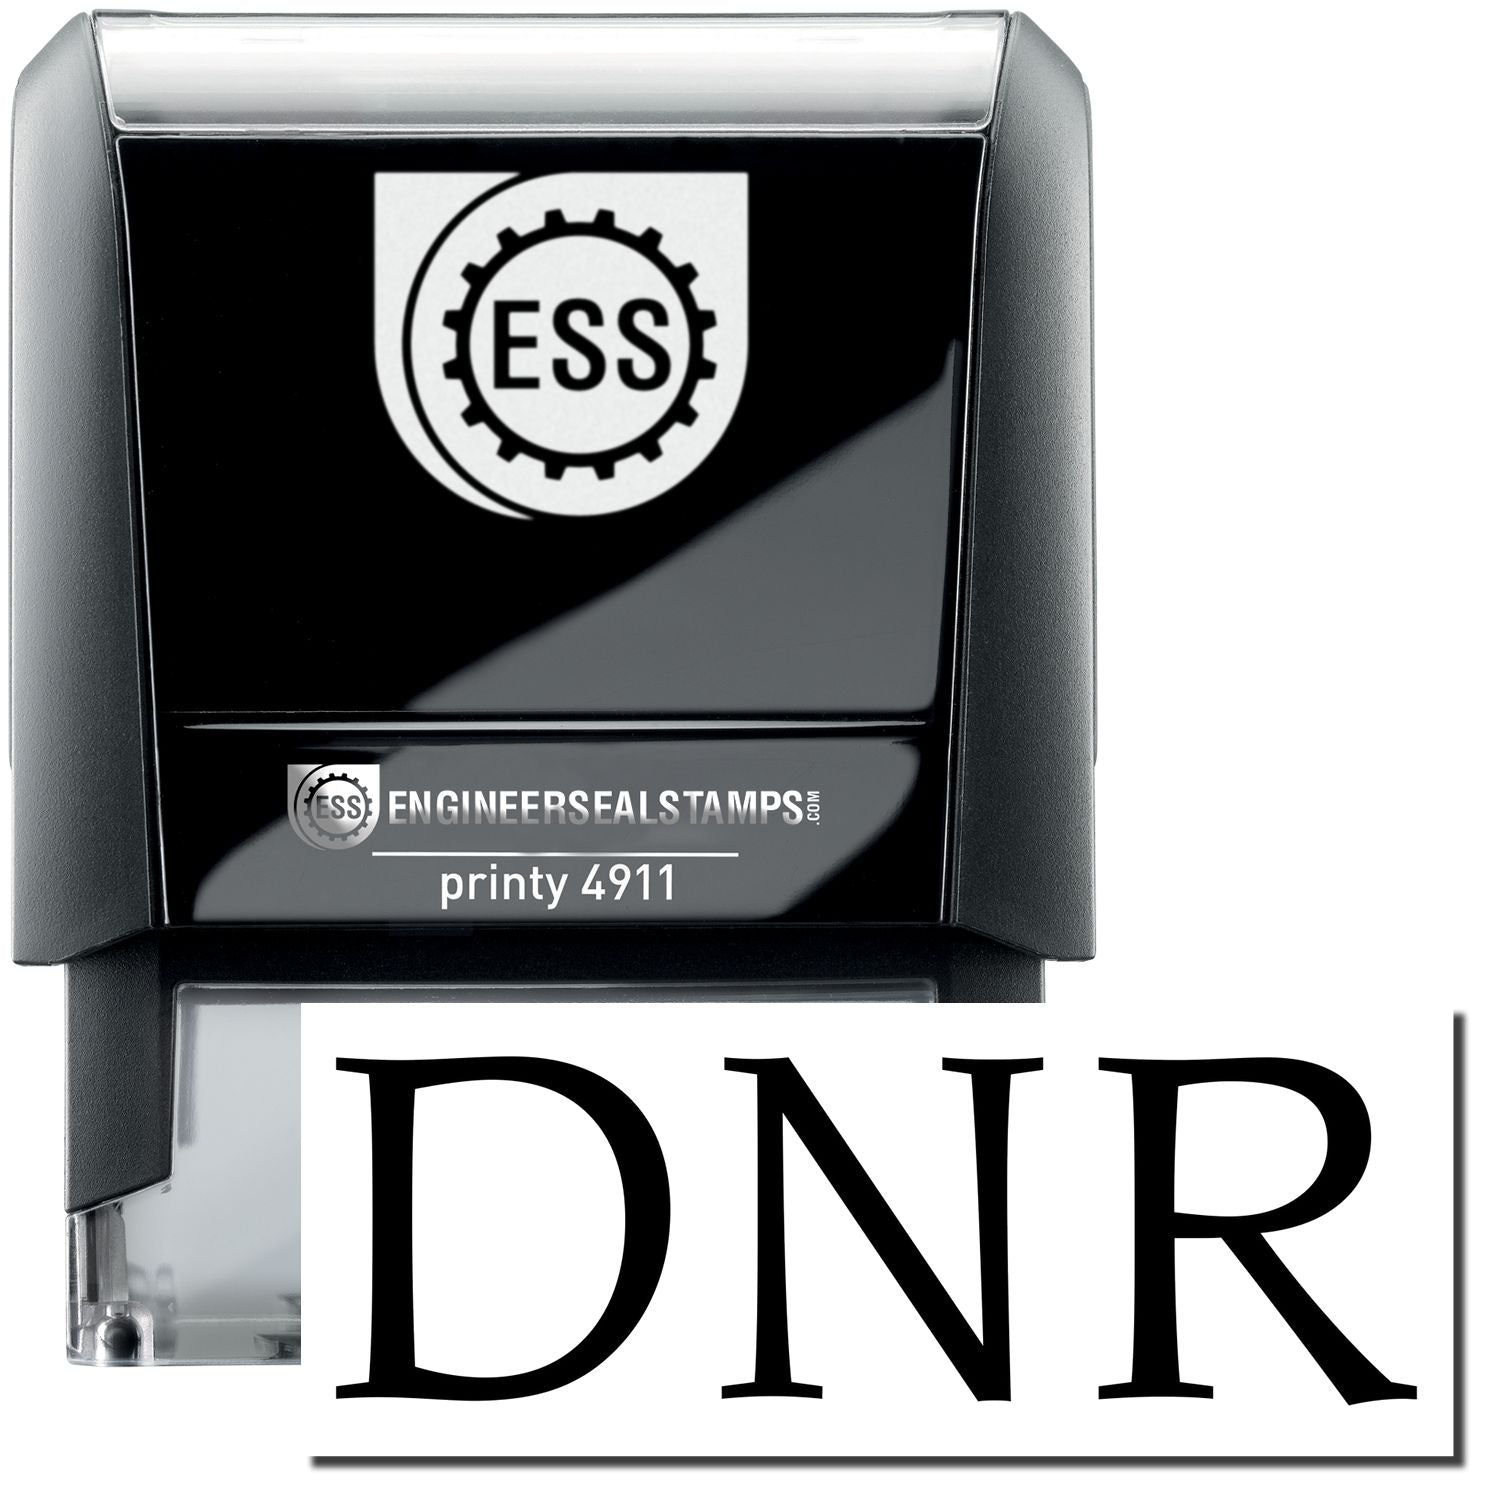 A self-inking stamp with a stamped image showing how the text "DNR" is displayed after stamping.